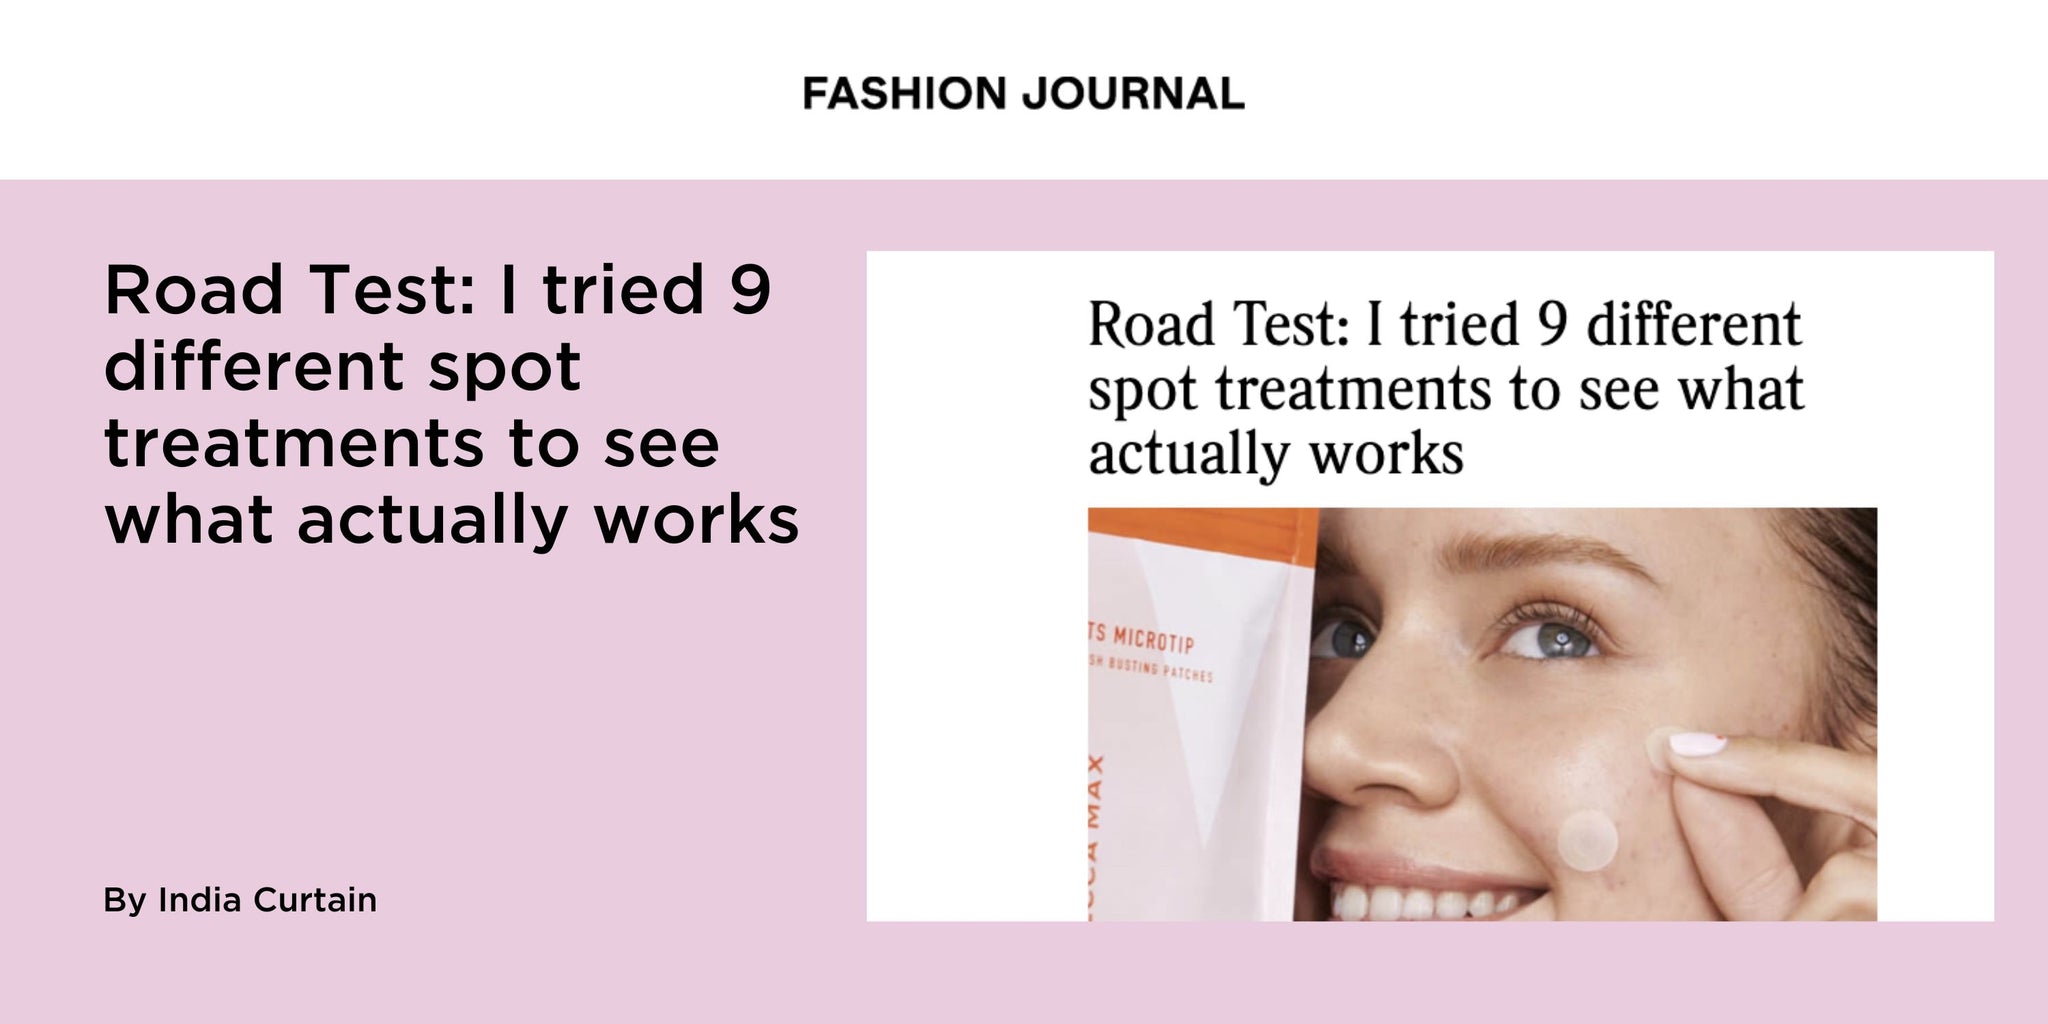 Road Test: I tried 9 different spot treatments to see what actually works